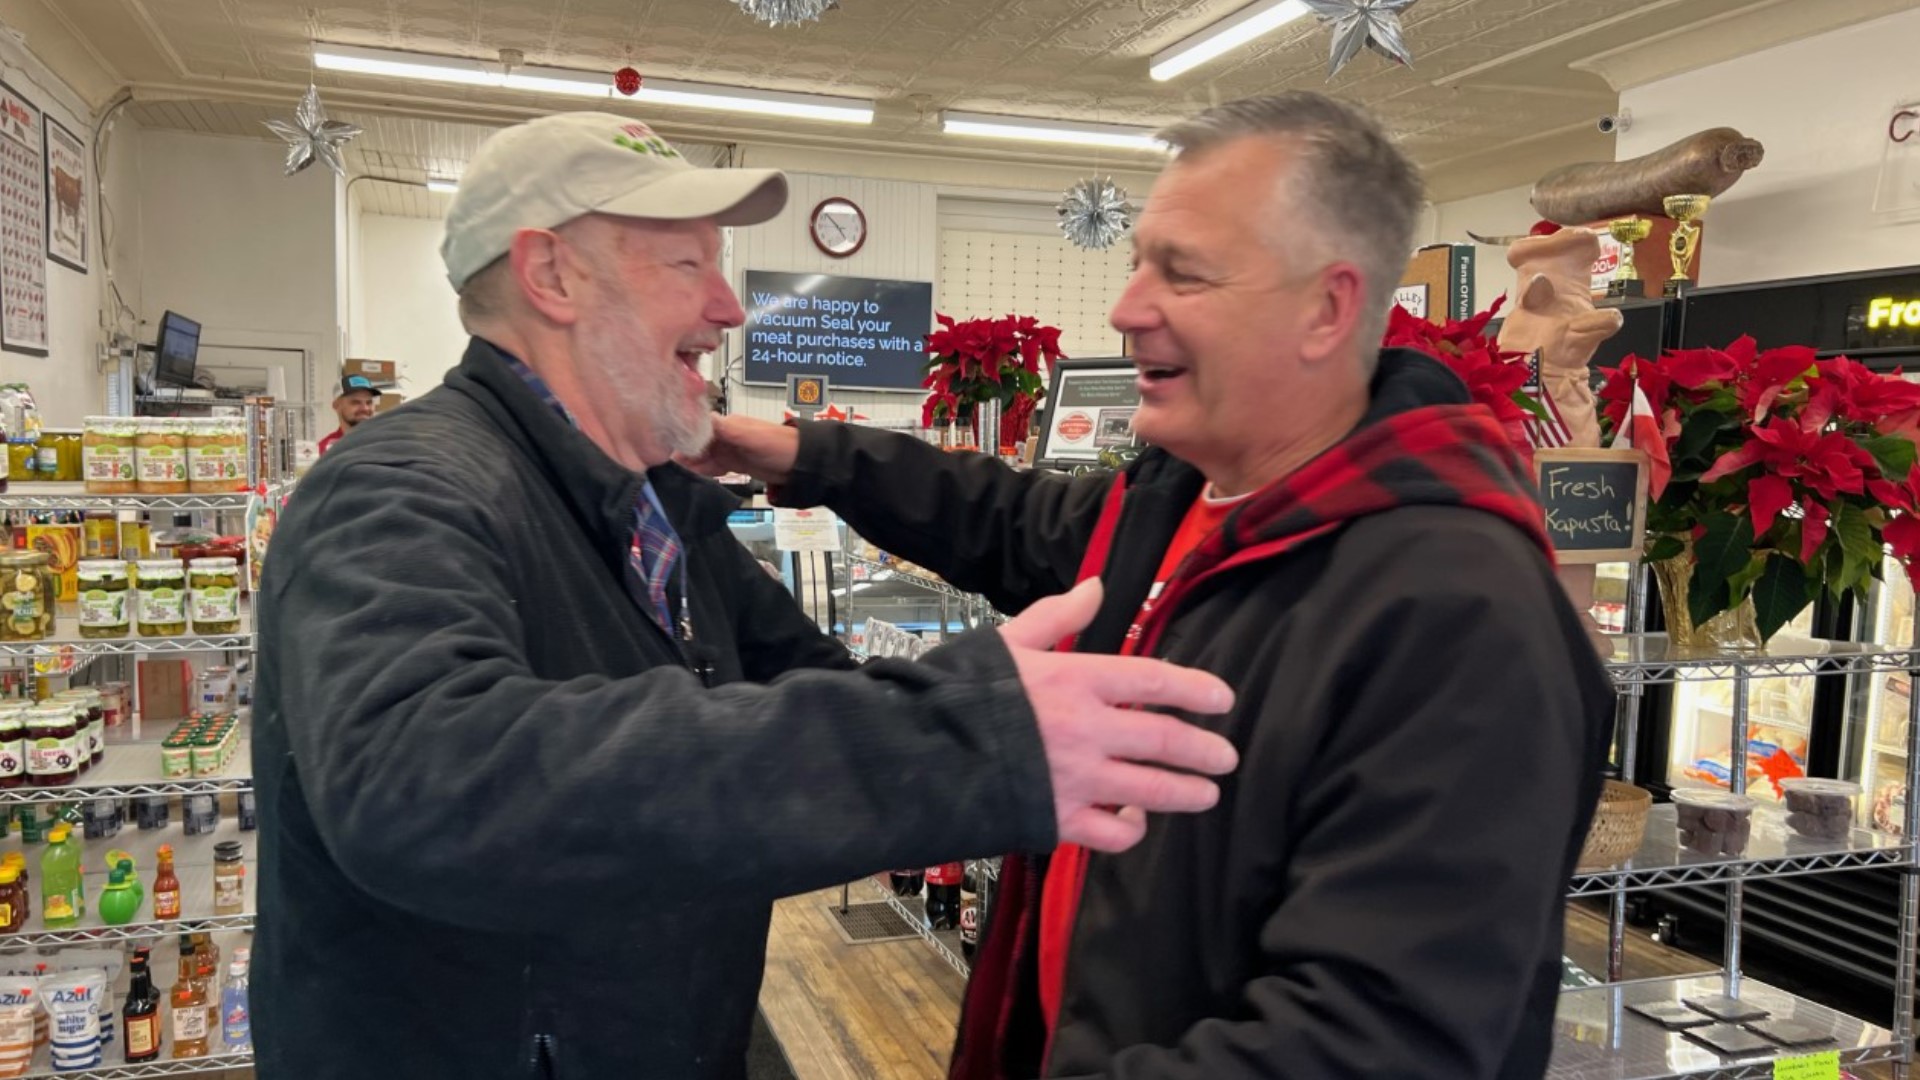 Fred Bivins had a heart attack at Lewandoski's Market and owner Gary Szotko performed CPR to save his life. Now, Fred is paying it forward.